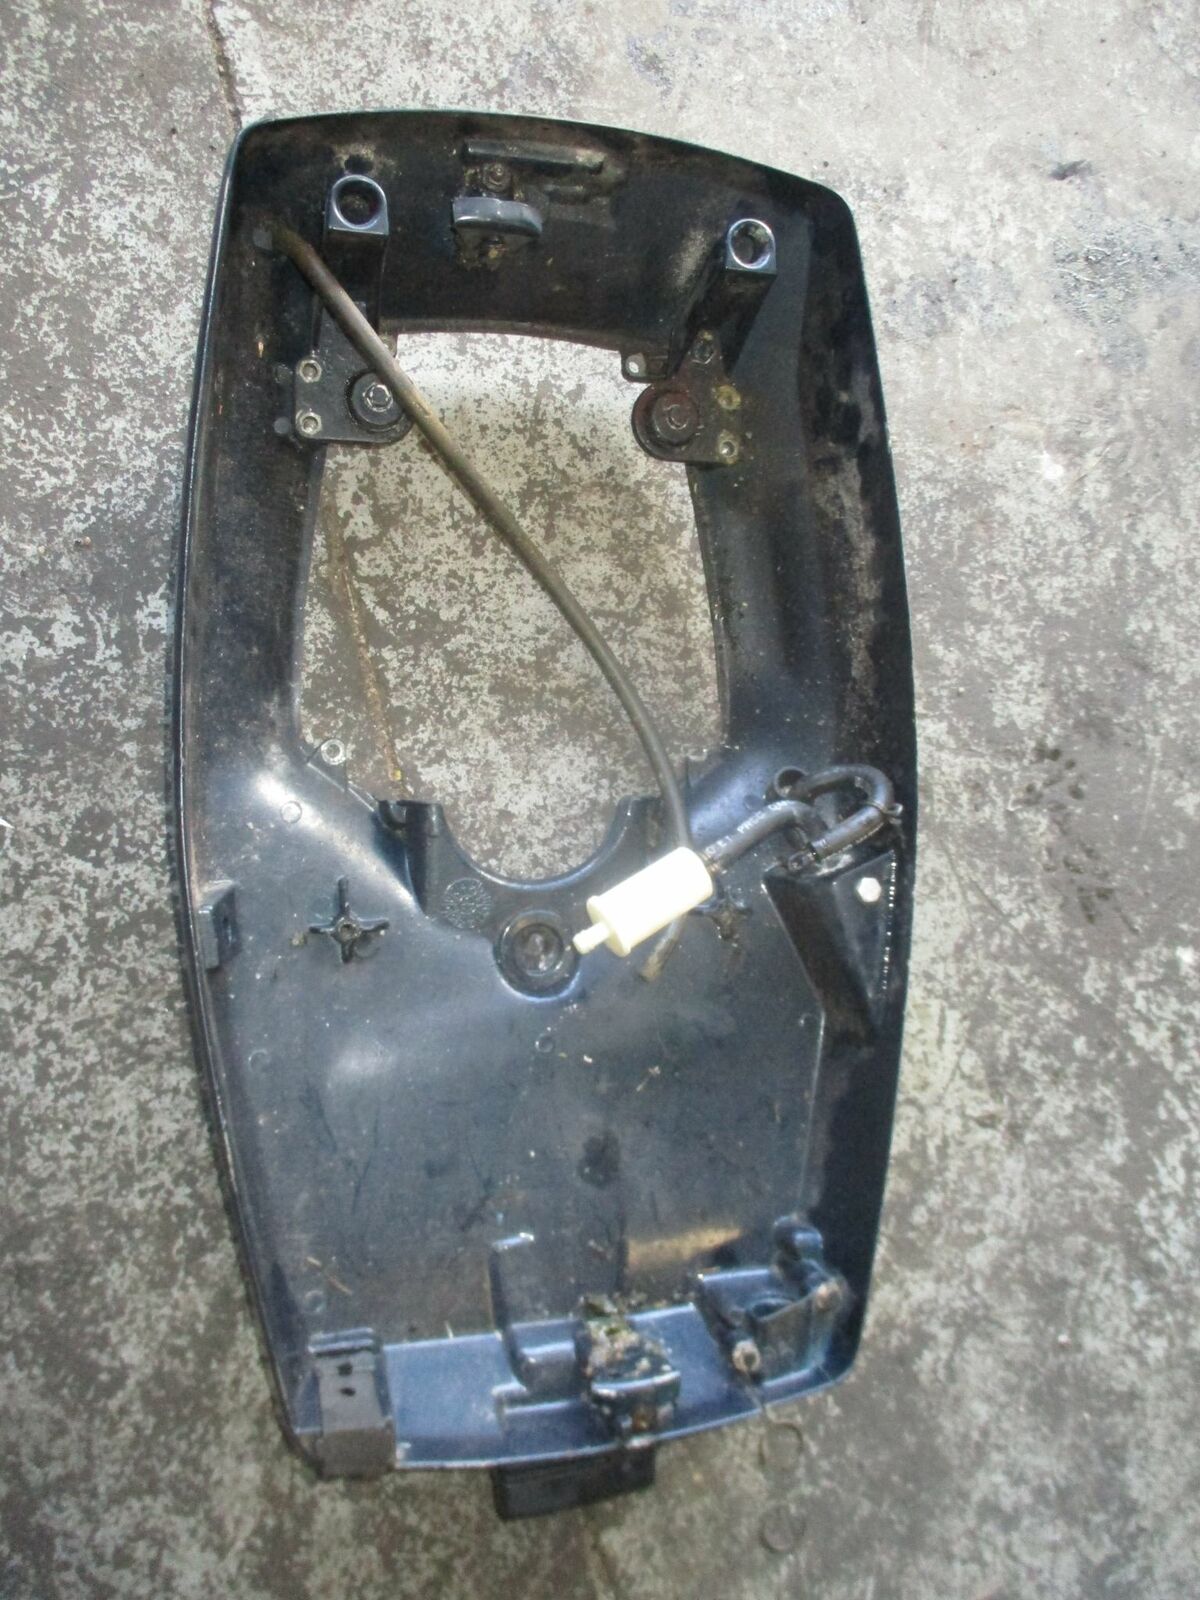 Evinrude 70 hp 2 stroke outboard bottom cowling